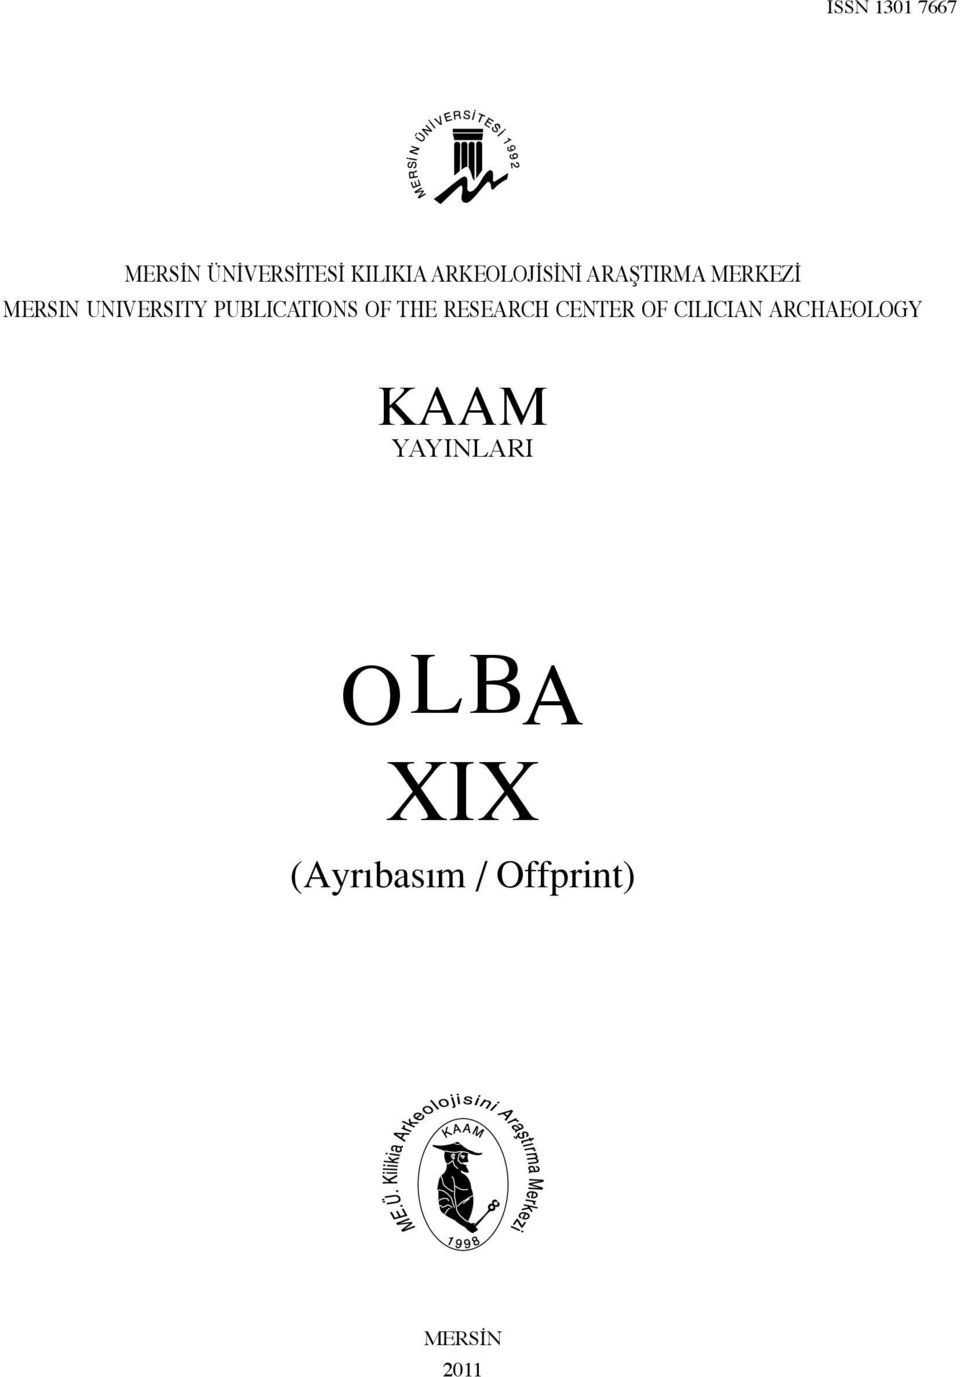 PUBLICATIONS OF THE RESEARCH CENTER OF CILICIAN